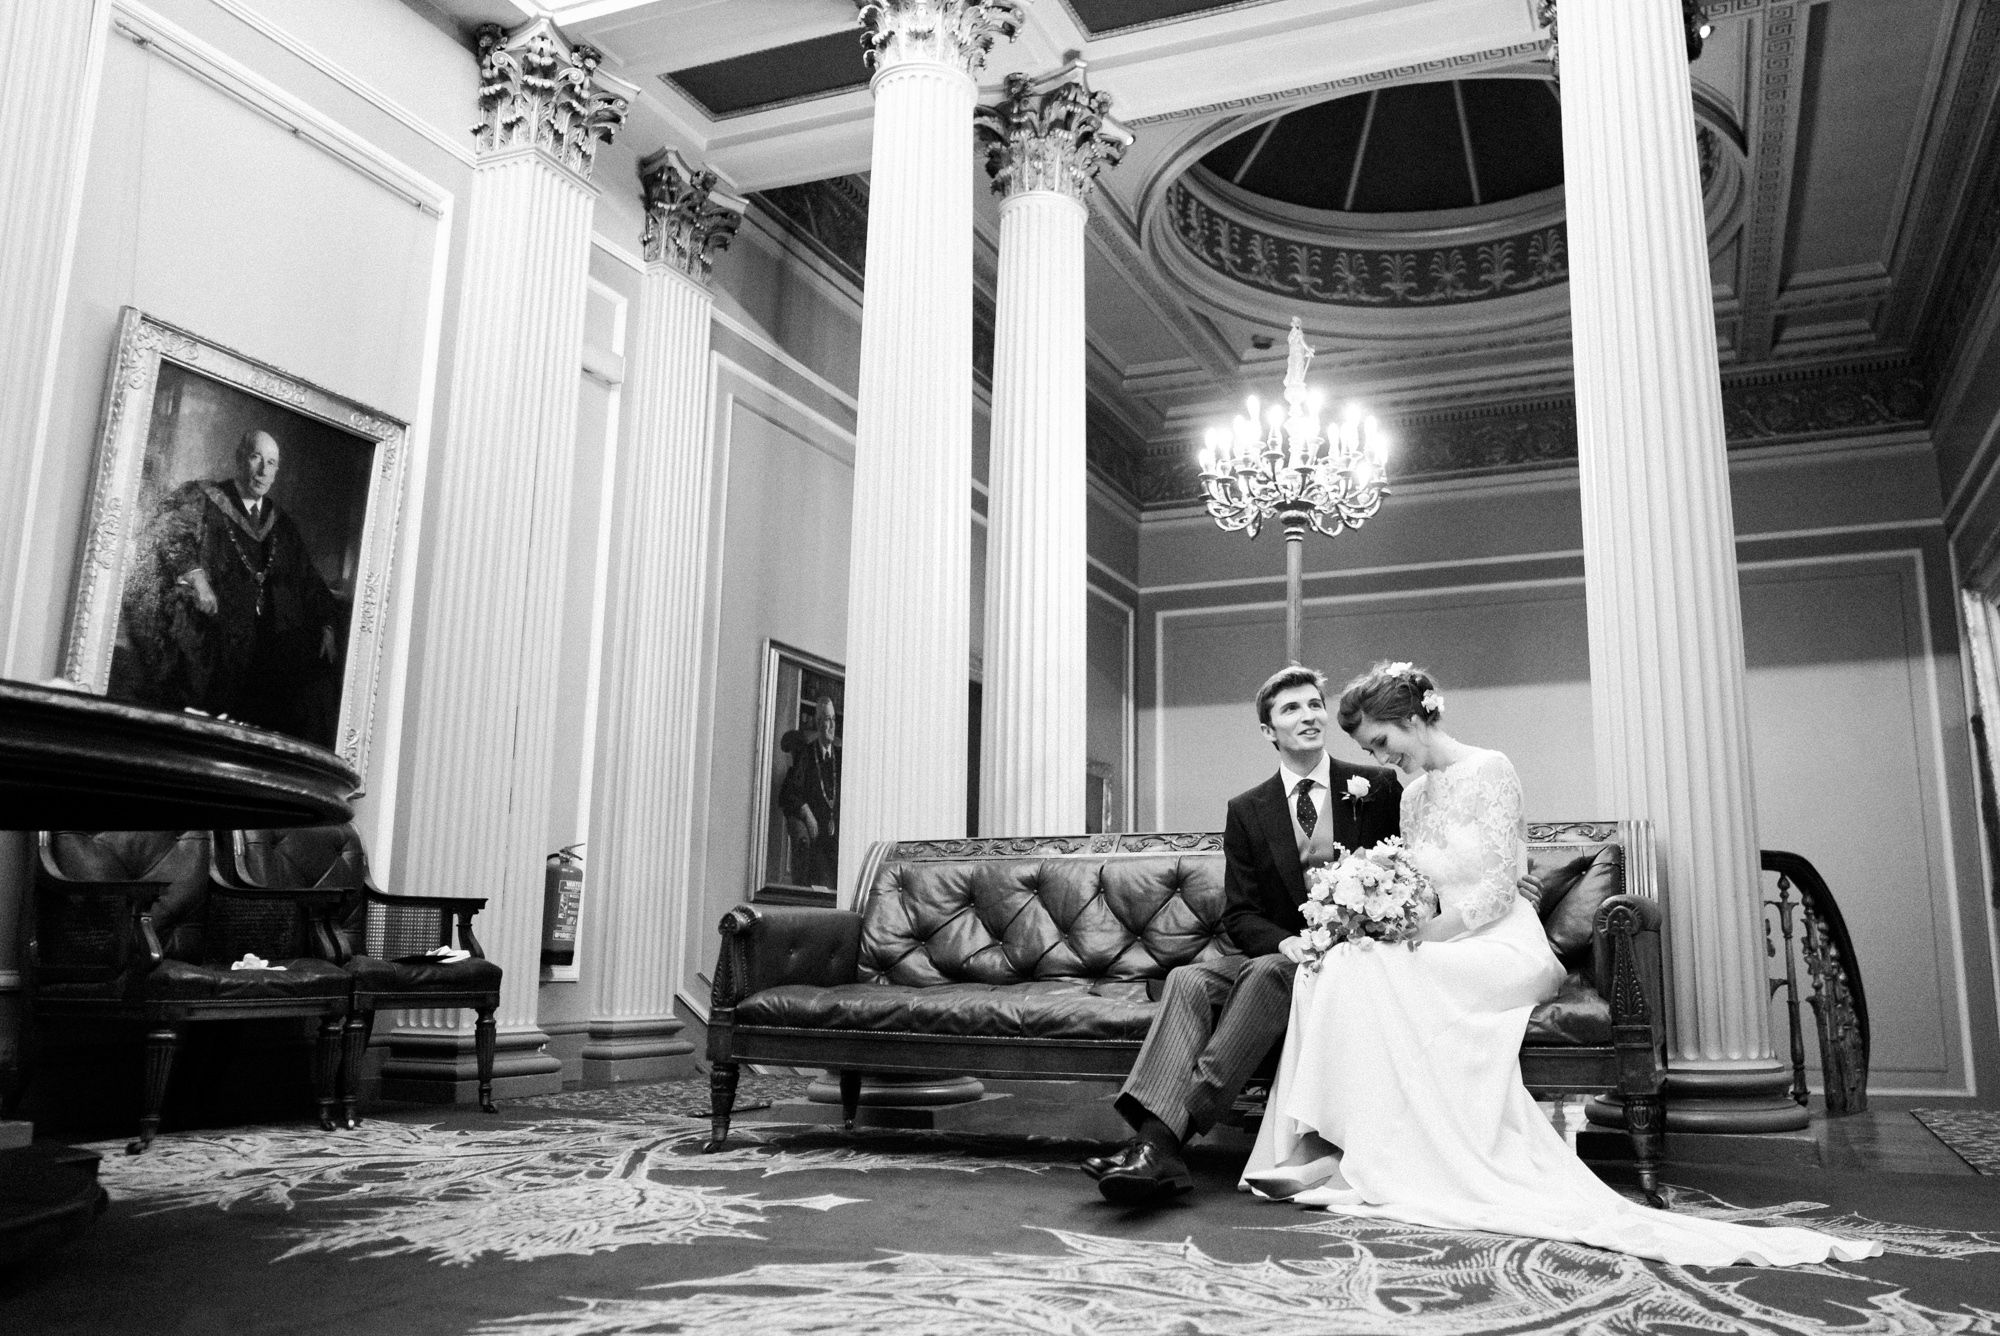 Classic Wedding in Black and White at the Signet Library